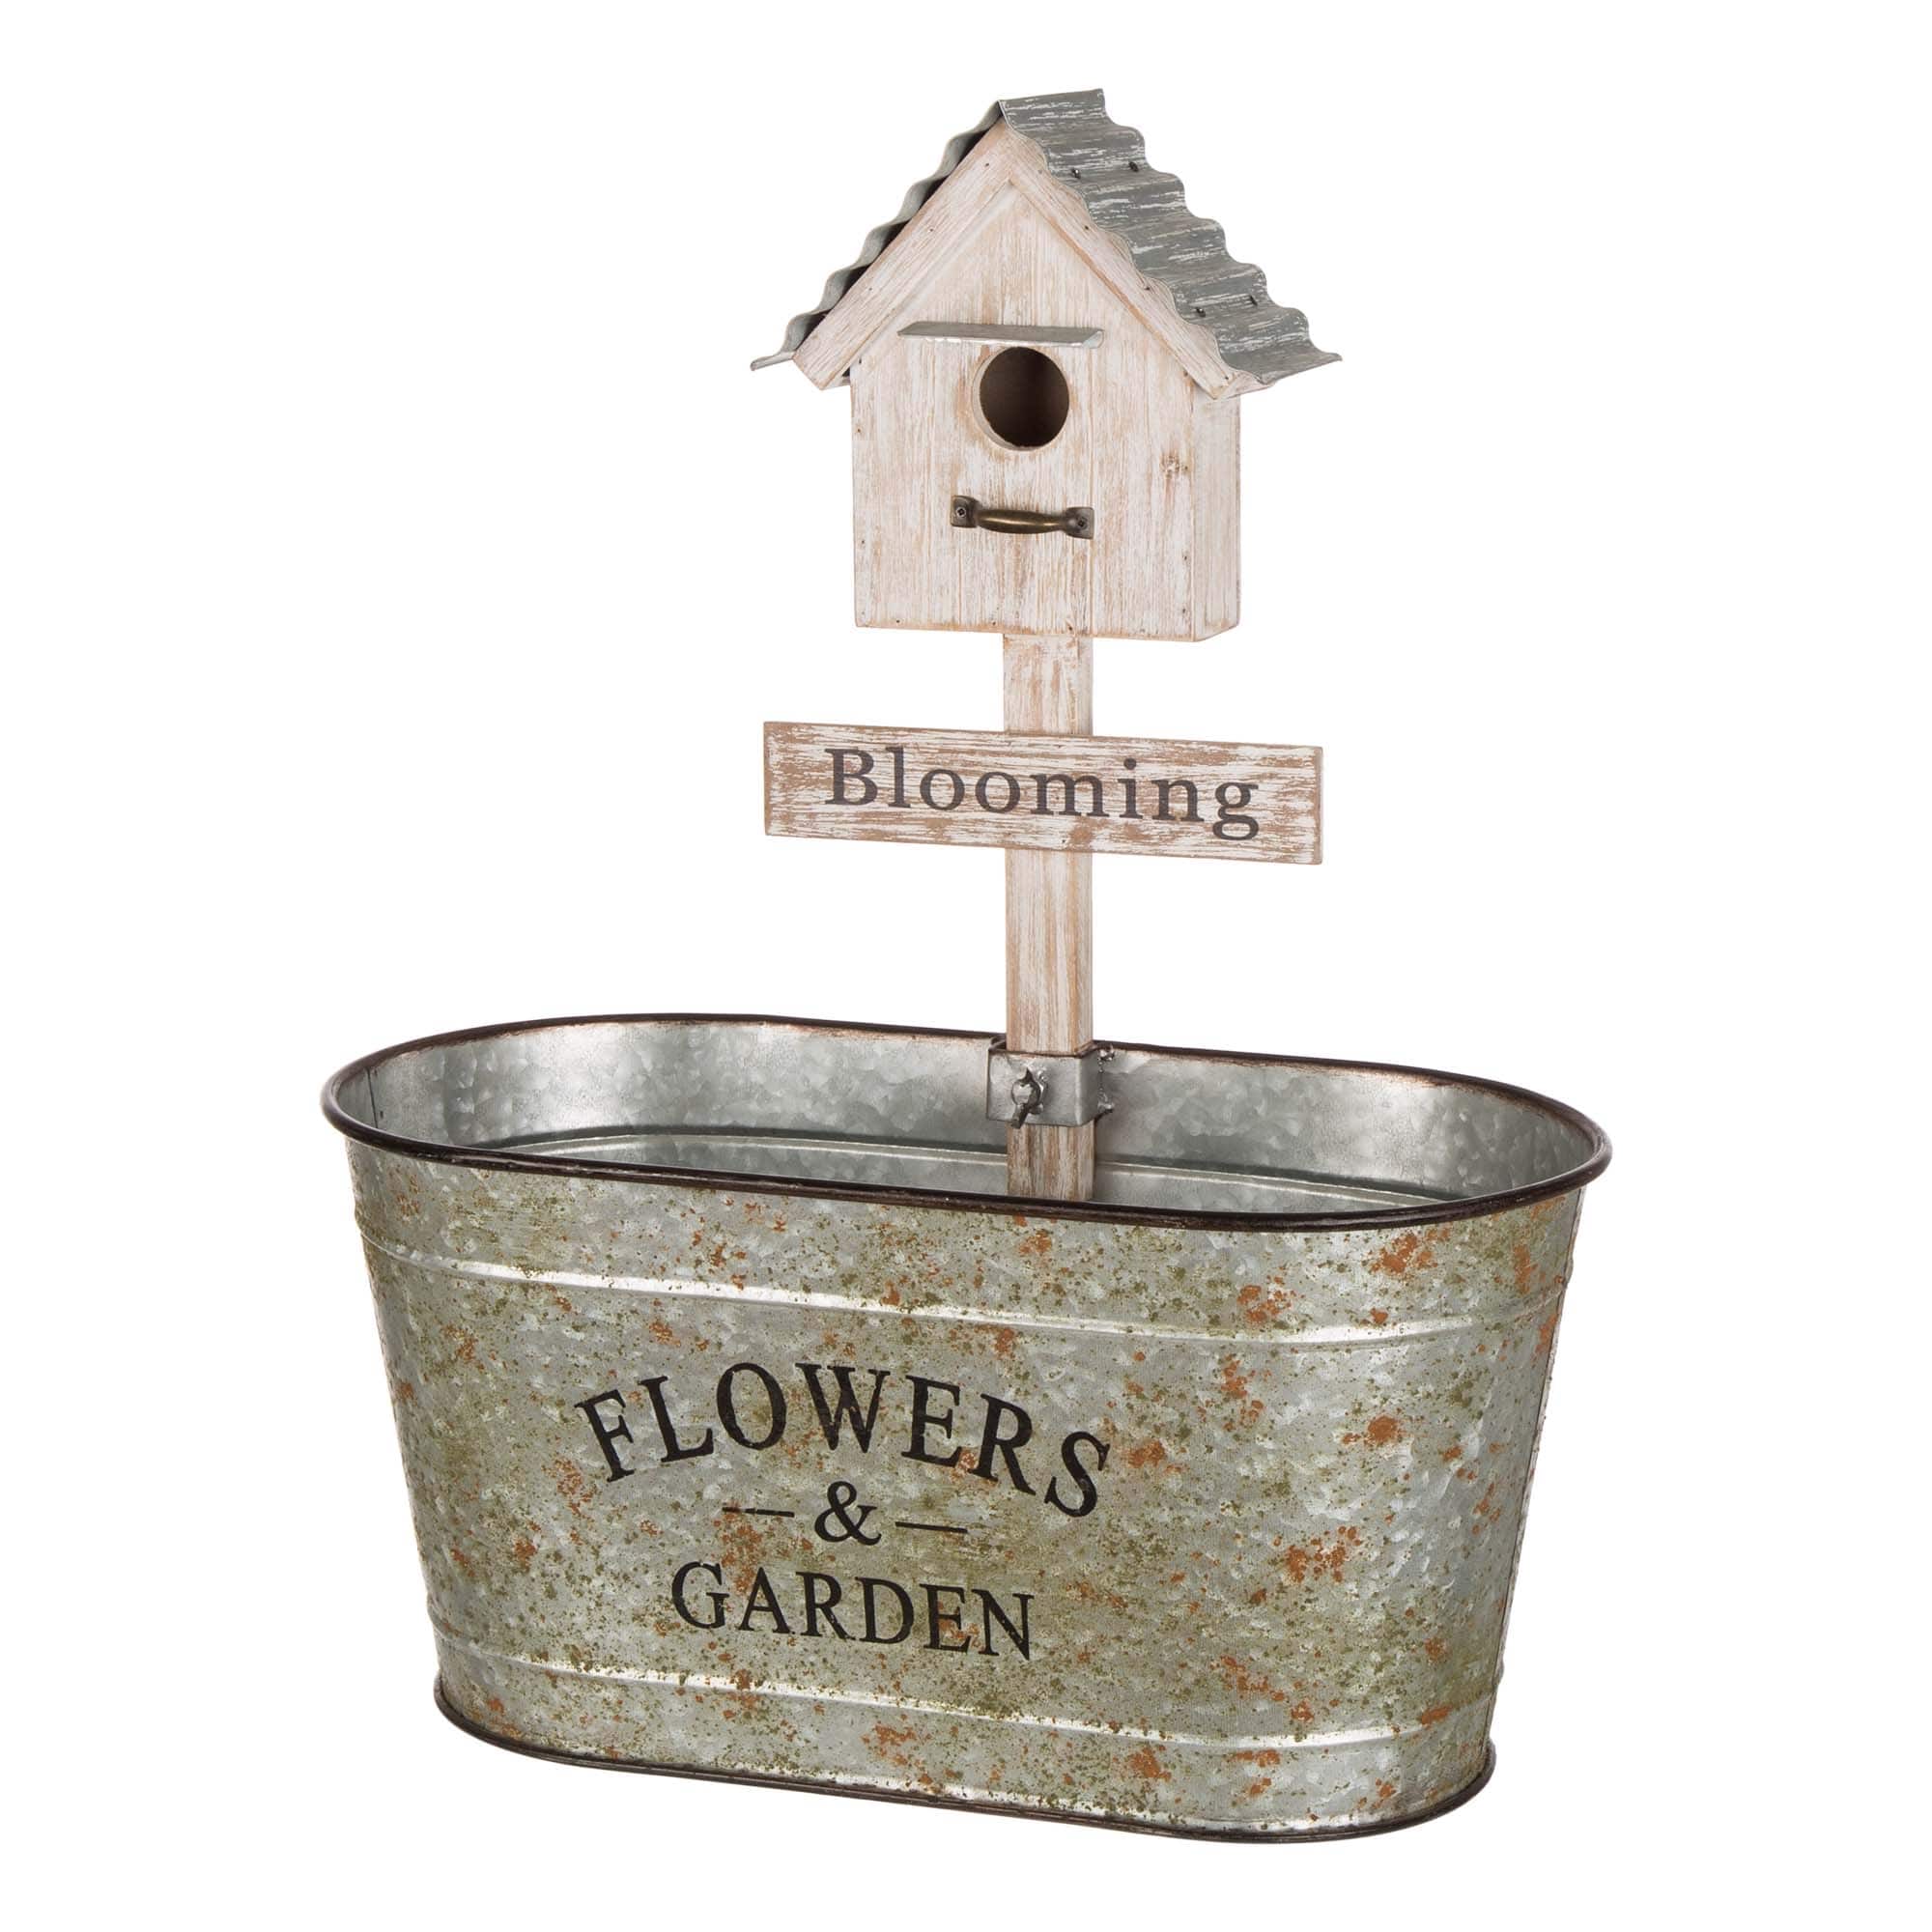 Image of Galvanized planter with a birdhouse